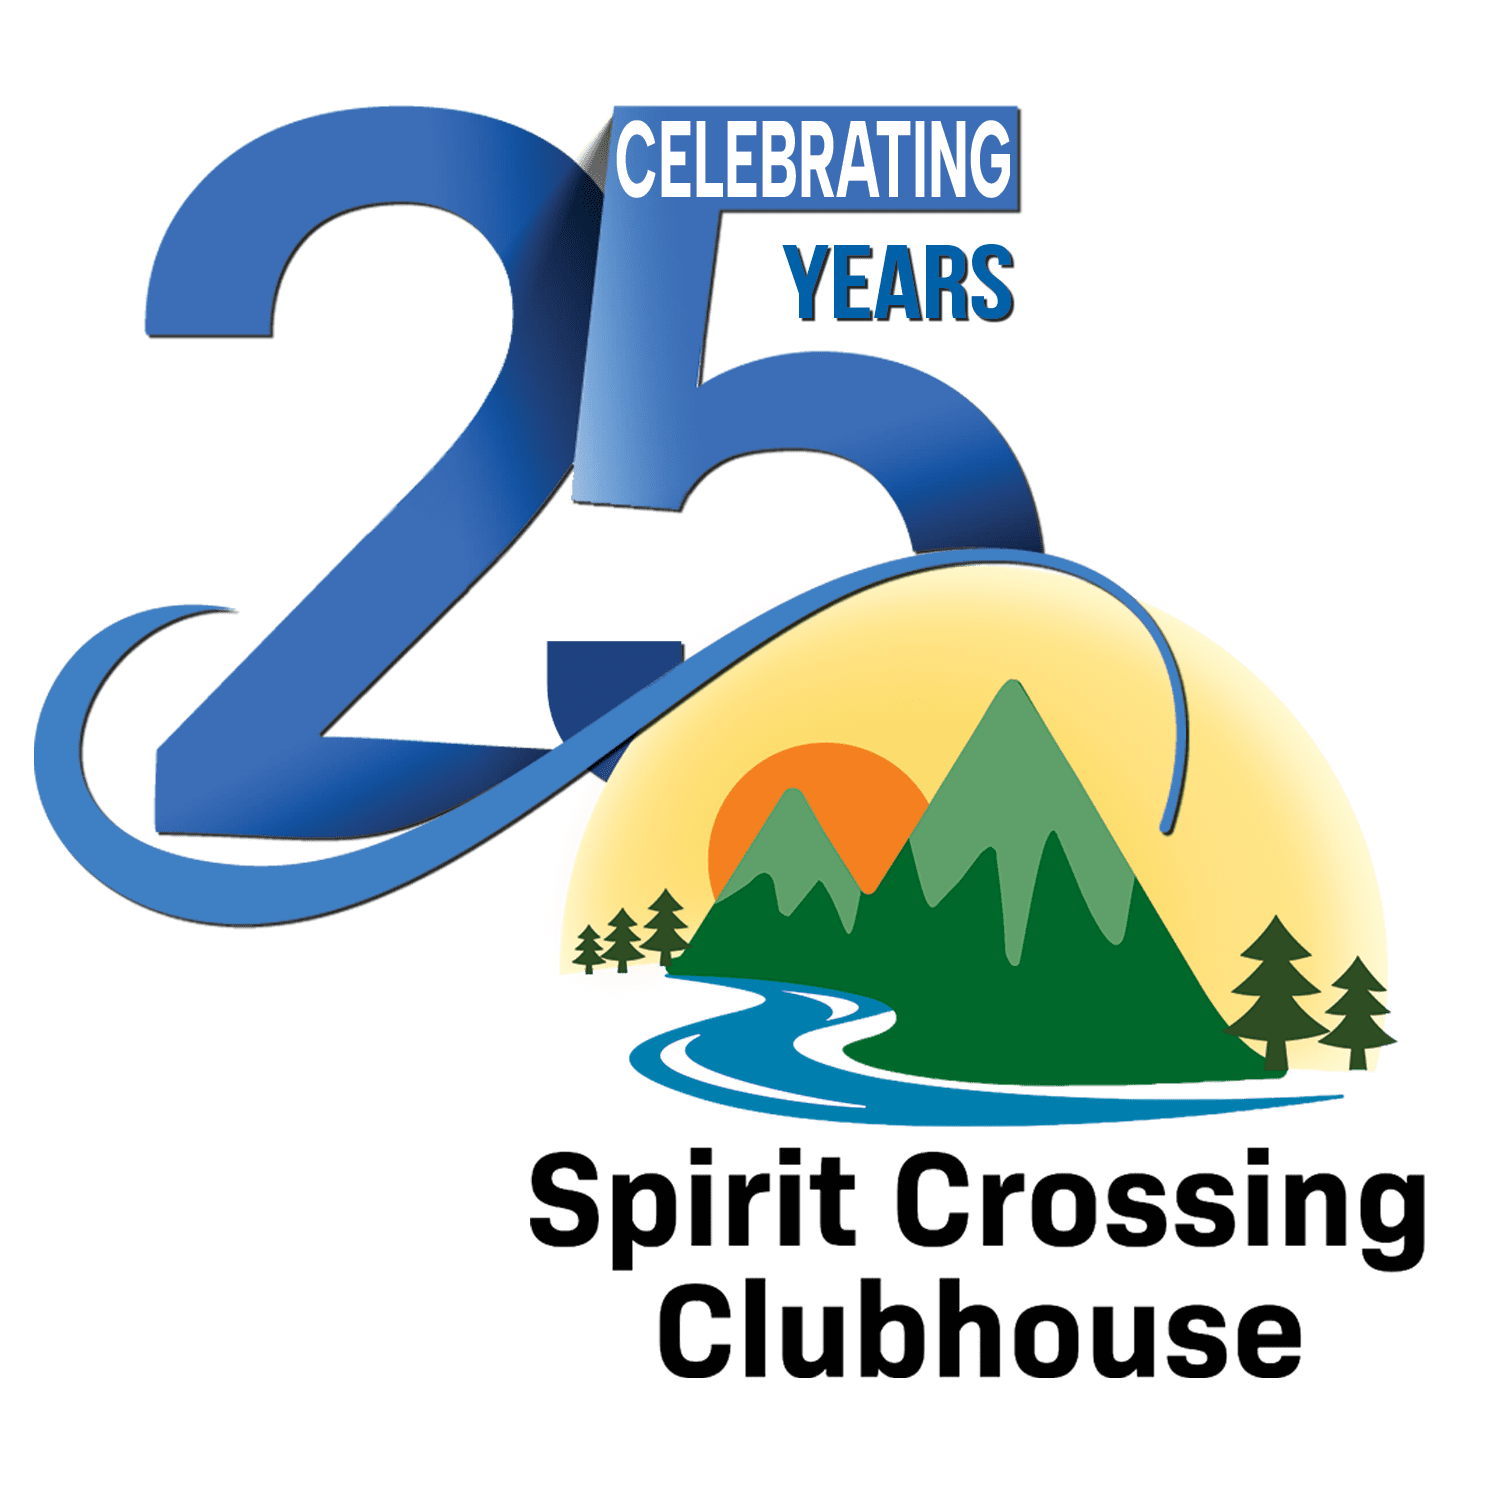 Spirit Crossing Clubhouse